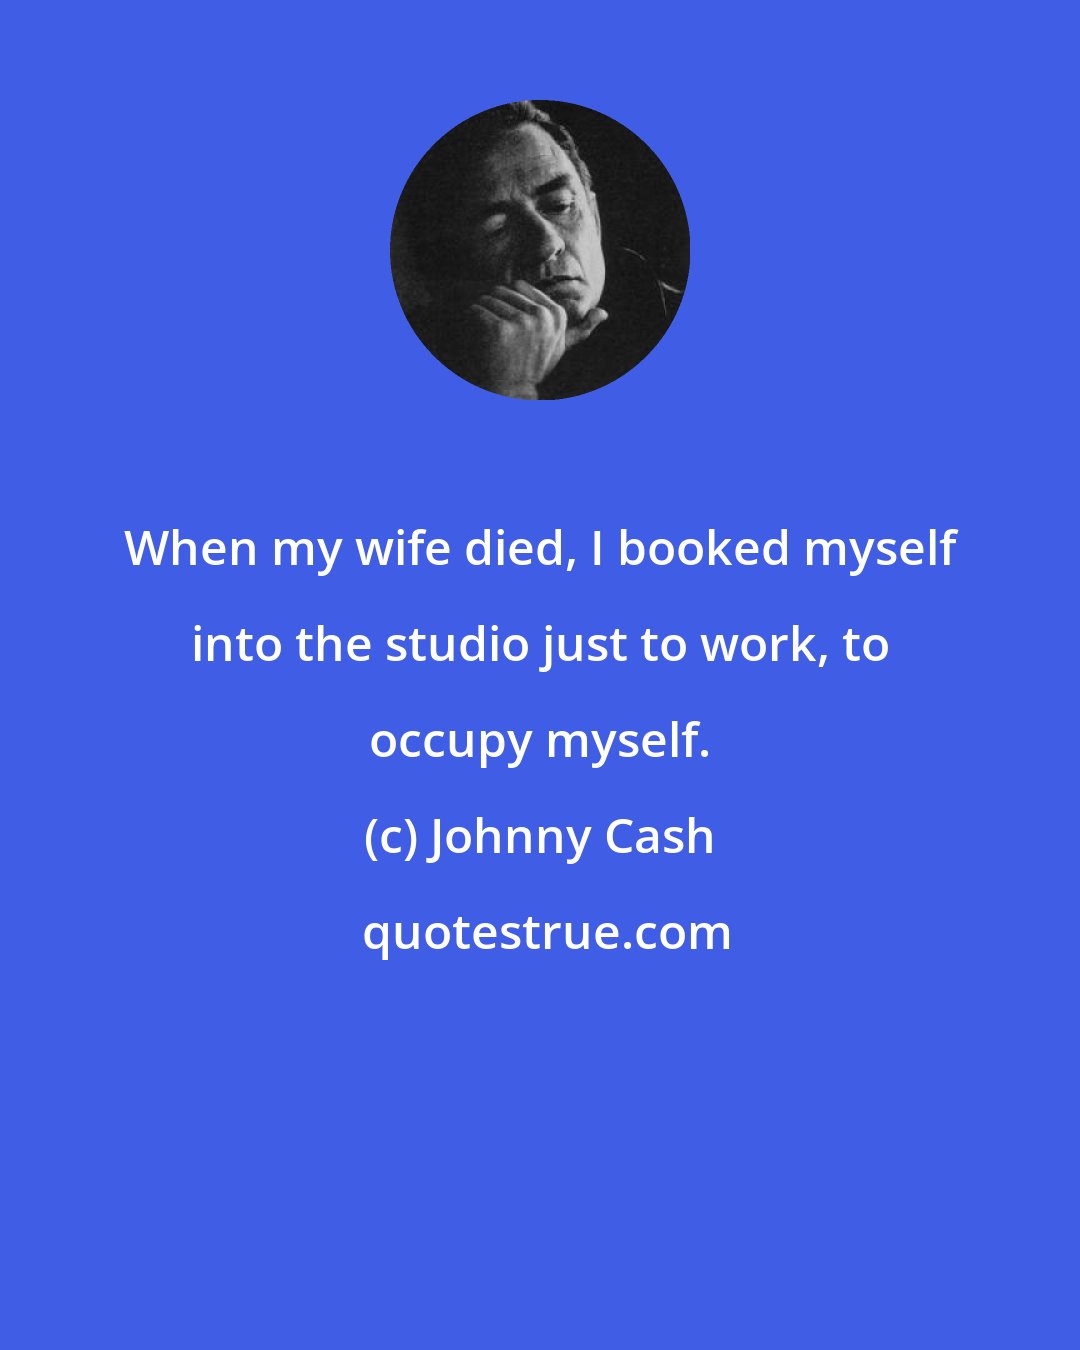 Johnny Cash: When my wife died, I booked myself into the studio just to work, to occupy myself.